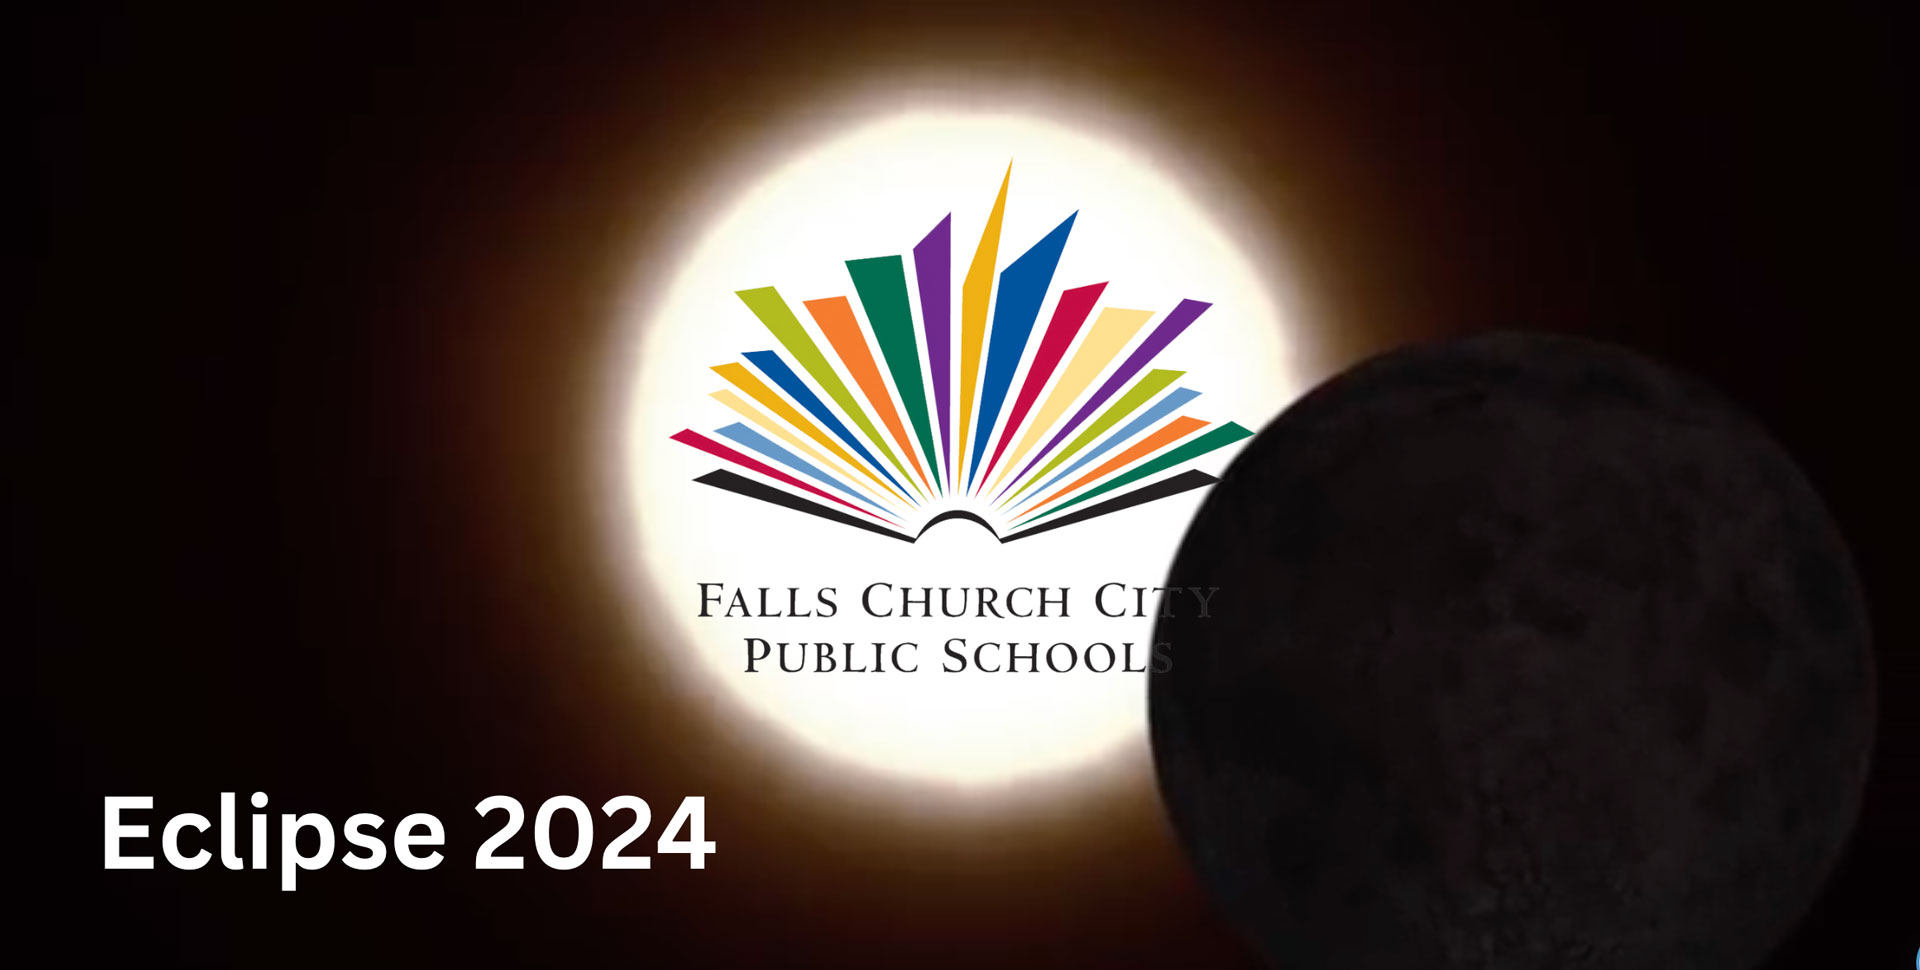 Eclipse 2024 lwith FCCPS logo on the face of the sun being eclipsed by the moon.